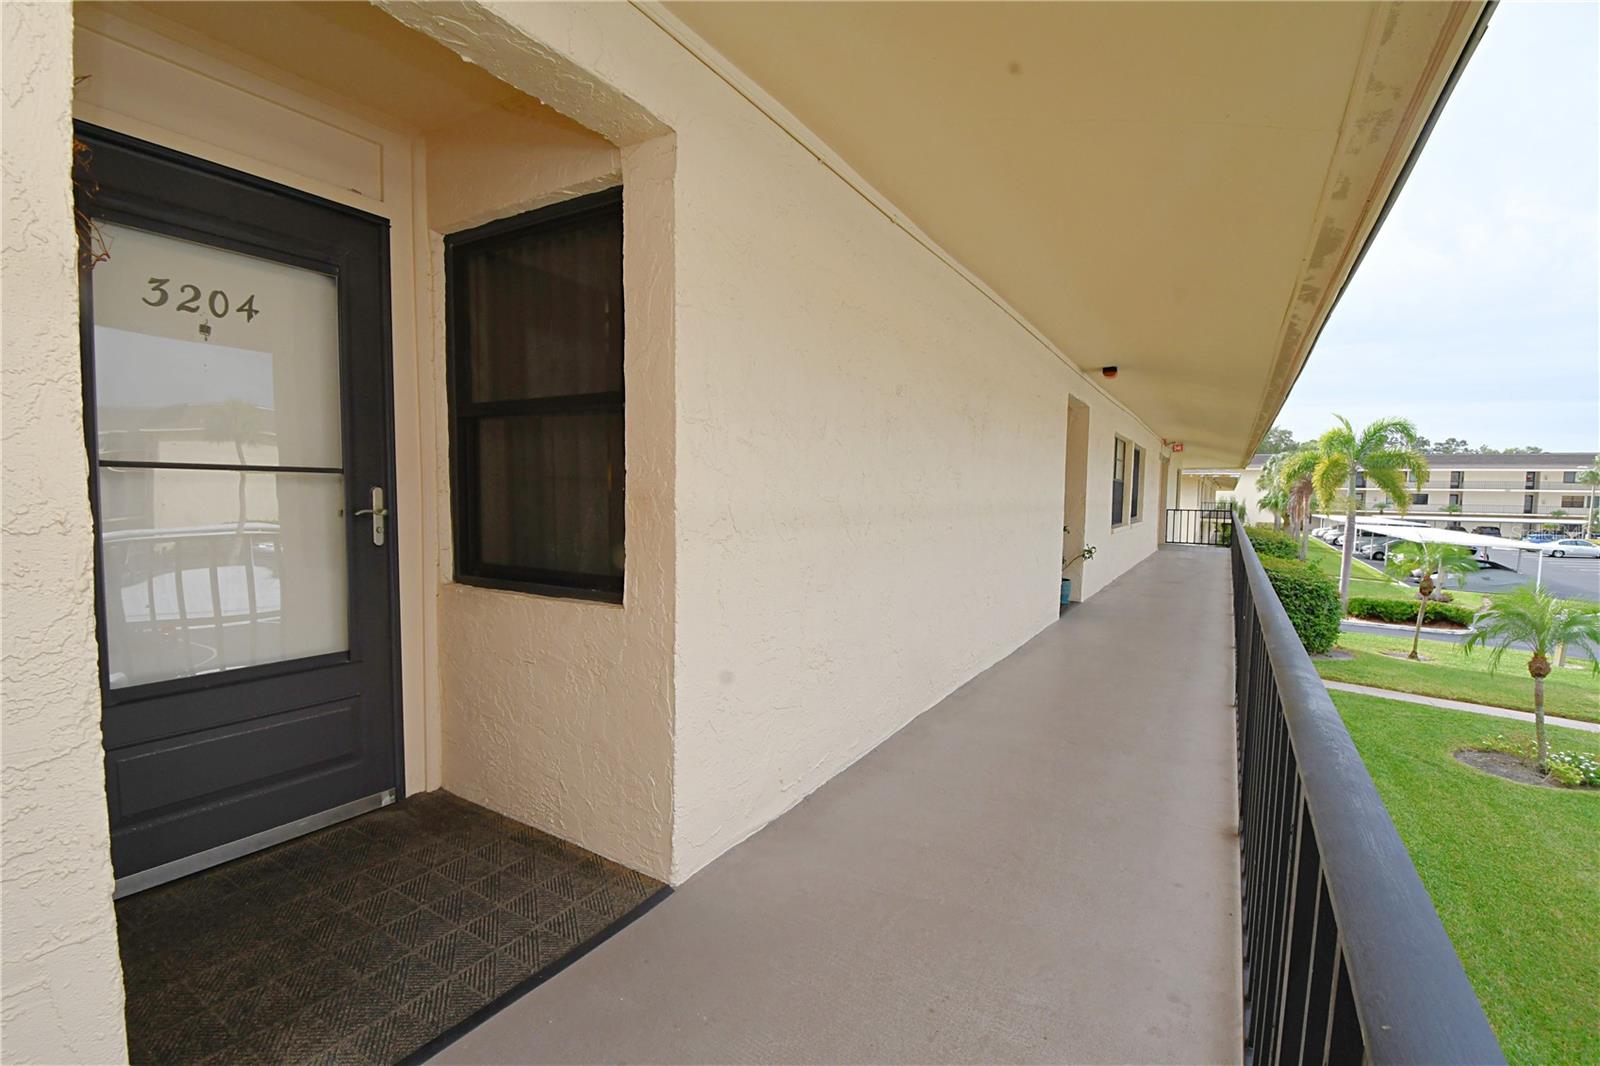 The entrance to the unit is featuring covered front porch.